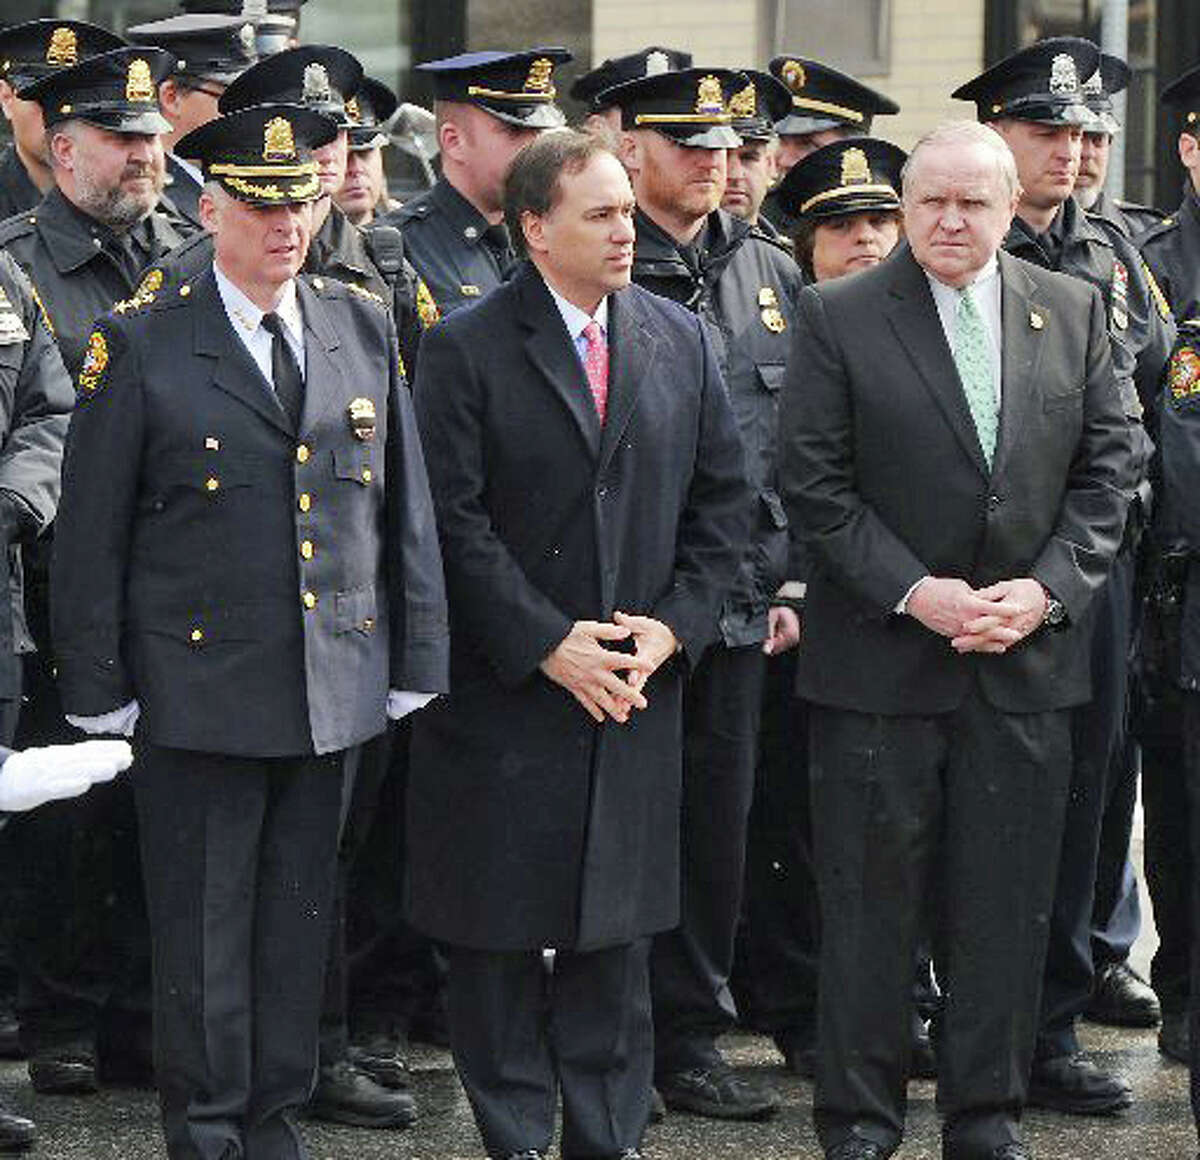 From left, Greenwich Police Chief, James Heavey, Greenwich First Selectman, Peter Tesei and Greenwich Selectman David Theis during the funeral for Greenwich Police Sgt. Roger Petrone at St. Mary Church, Greenwich, Wednesday morning, Feb. 26, 2014. Petrone died Thursday at age 44 after a seven year battle with amyotrophic lateral sclerosis, also known as Lou Gehrig's disease.